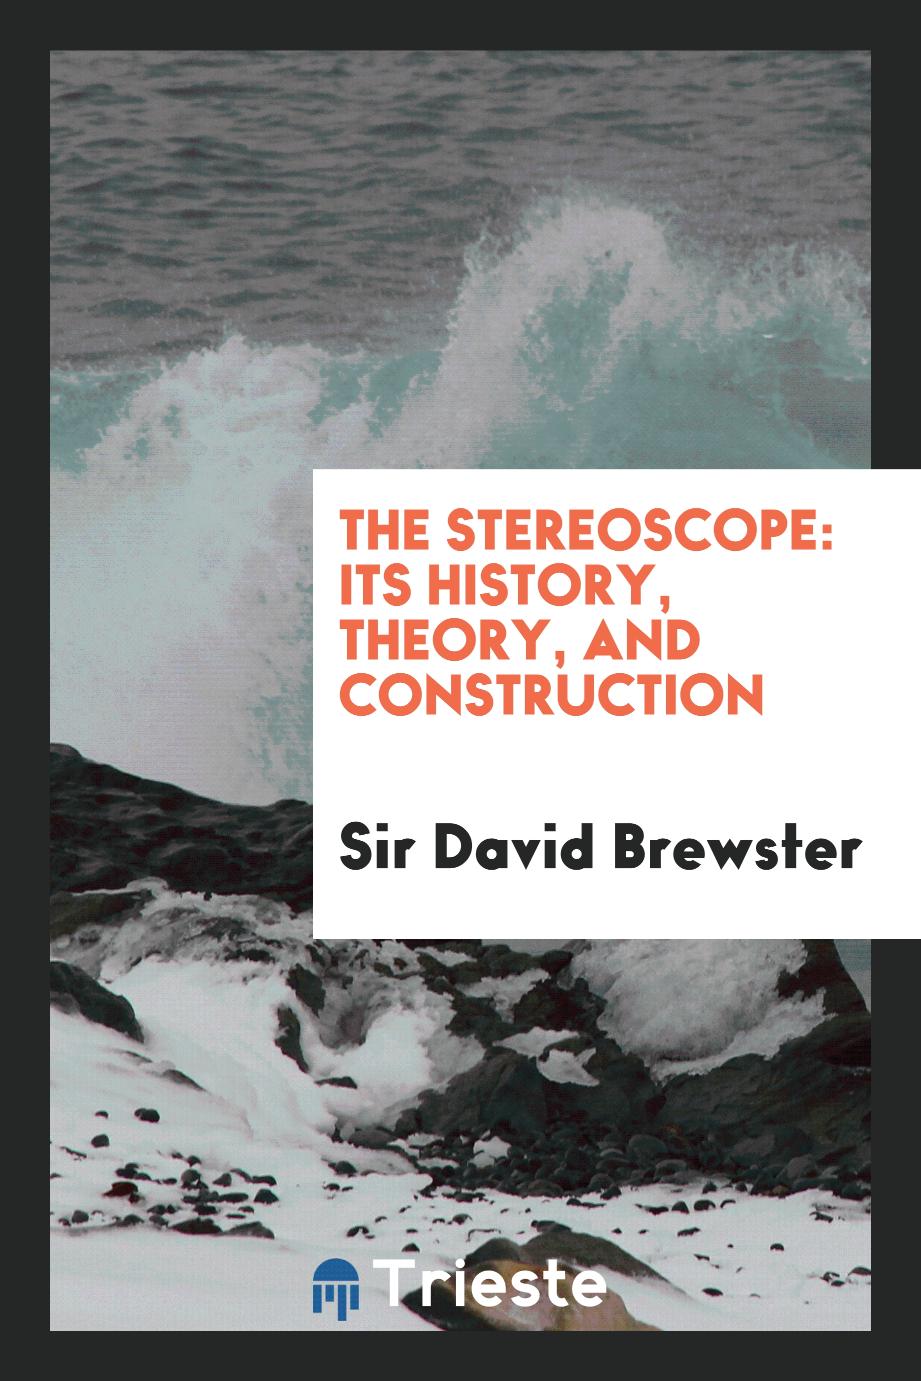 The Stereoscope: Its History, Theory, and Construction